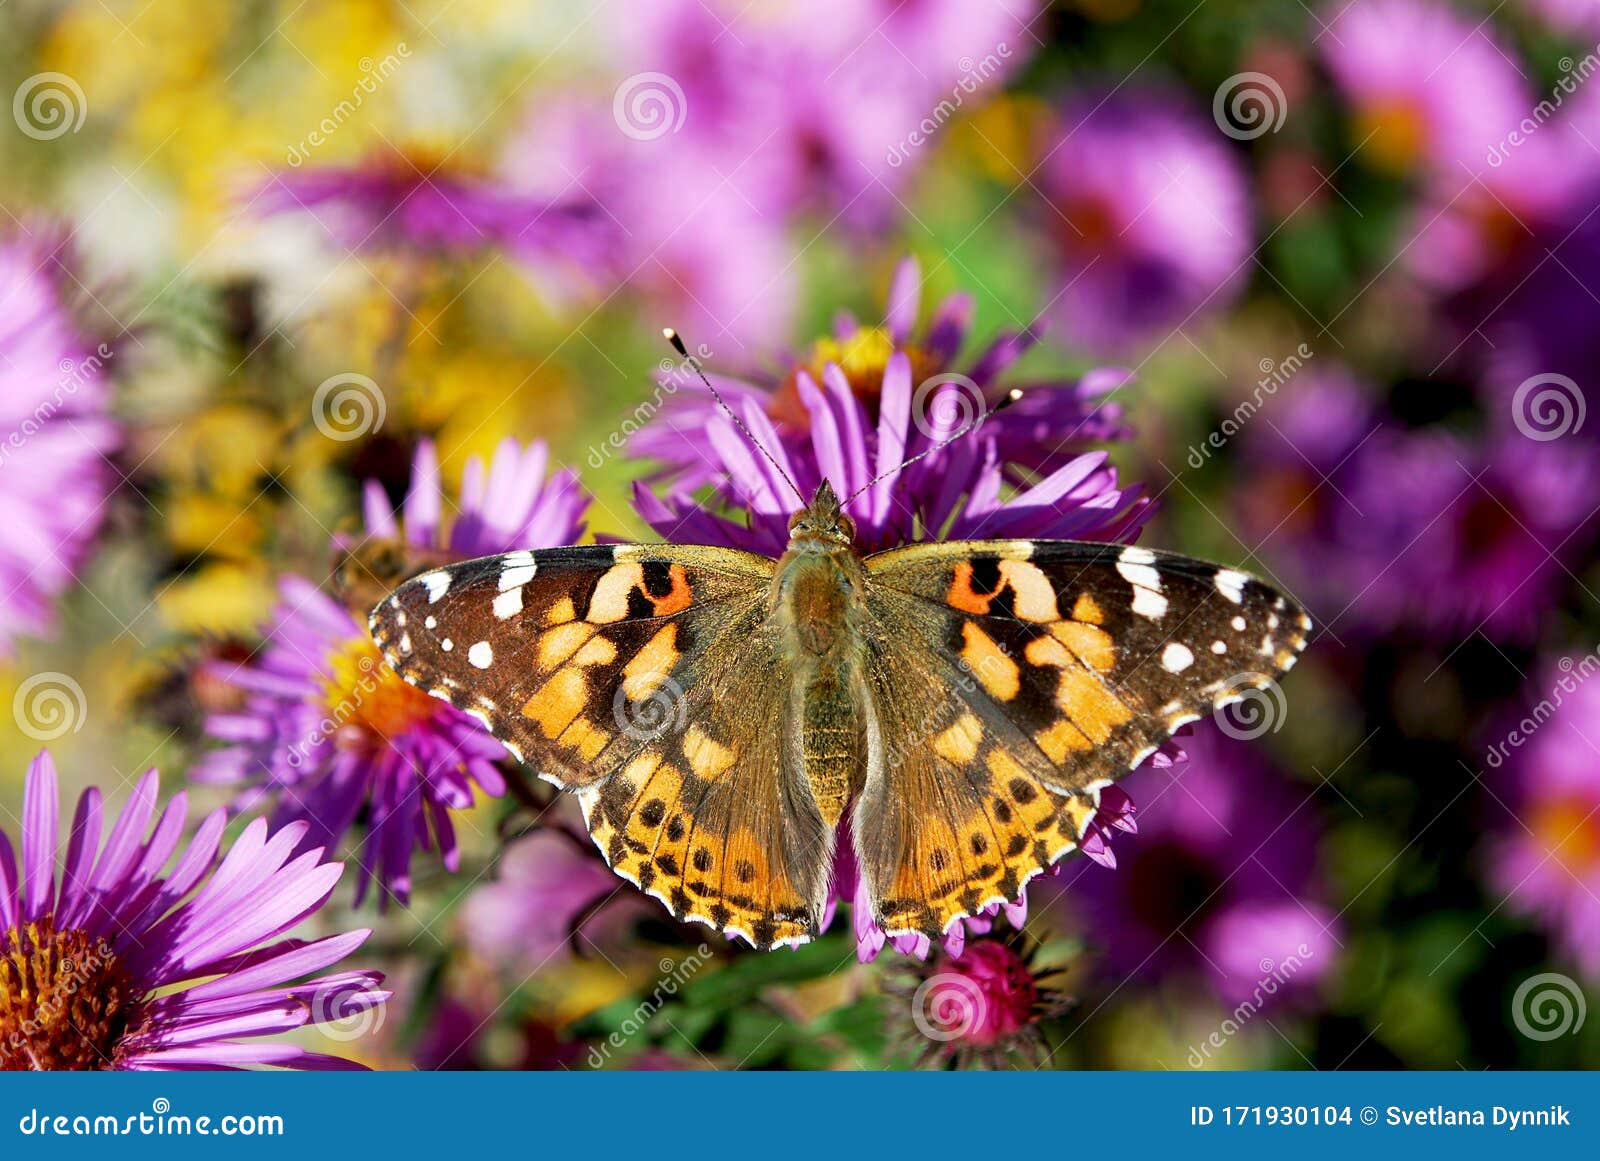 Bright Colorful Butterflies Sit on Lilac Aster Flowers Stock Photo ...